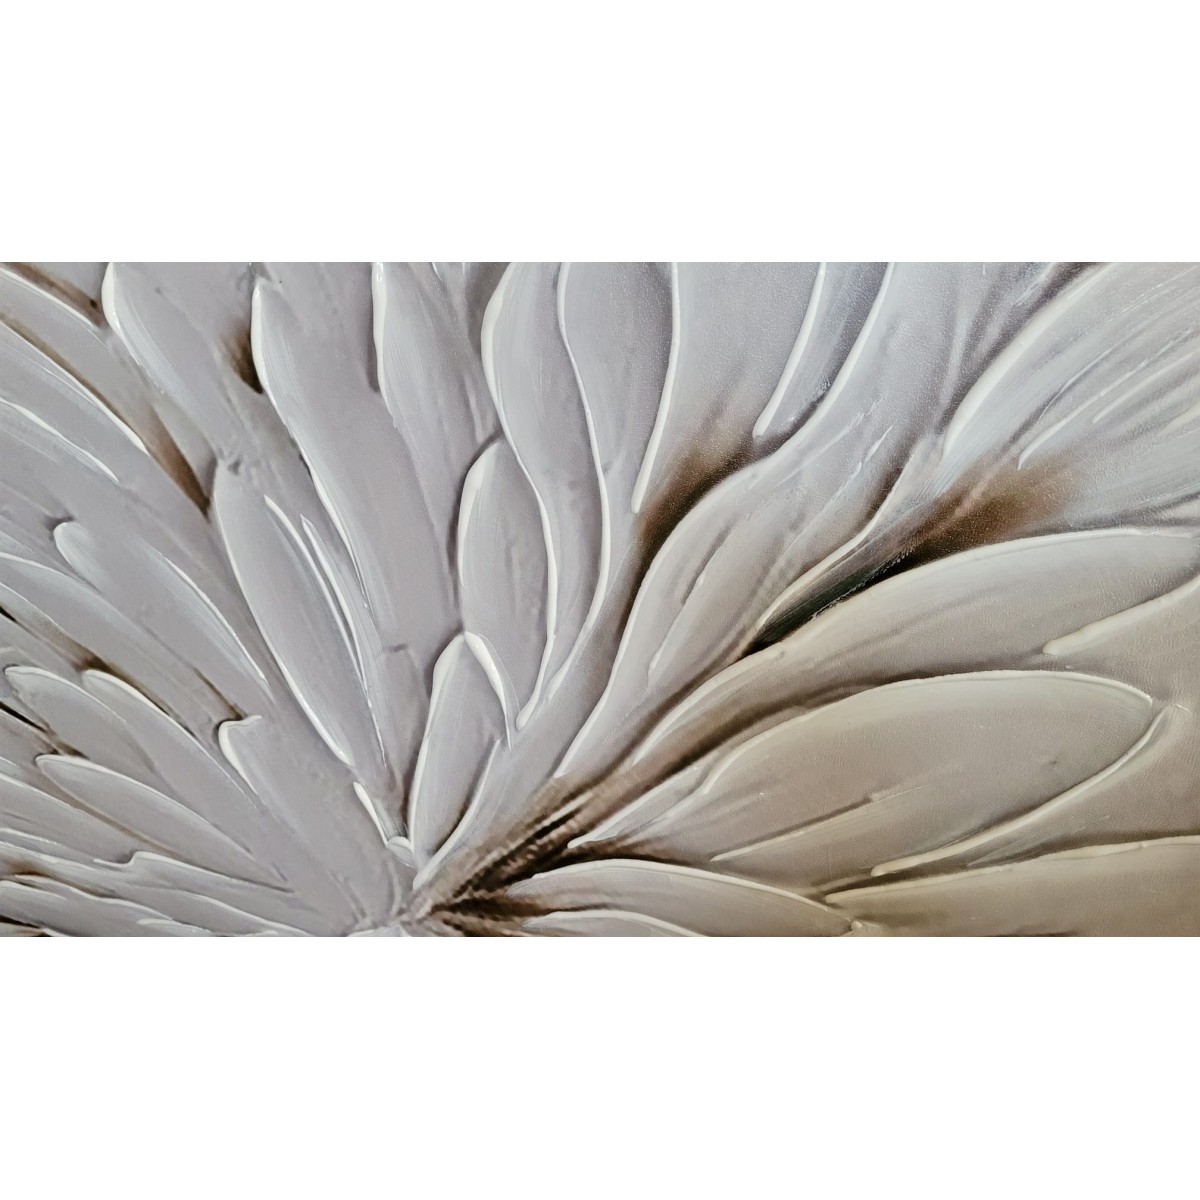 Enbossed Cream Flower 3d Heavy Textured Partial Oil Painting